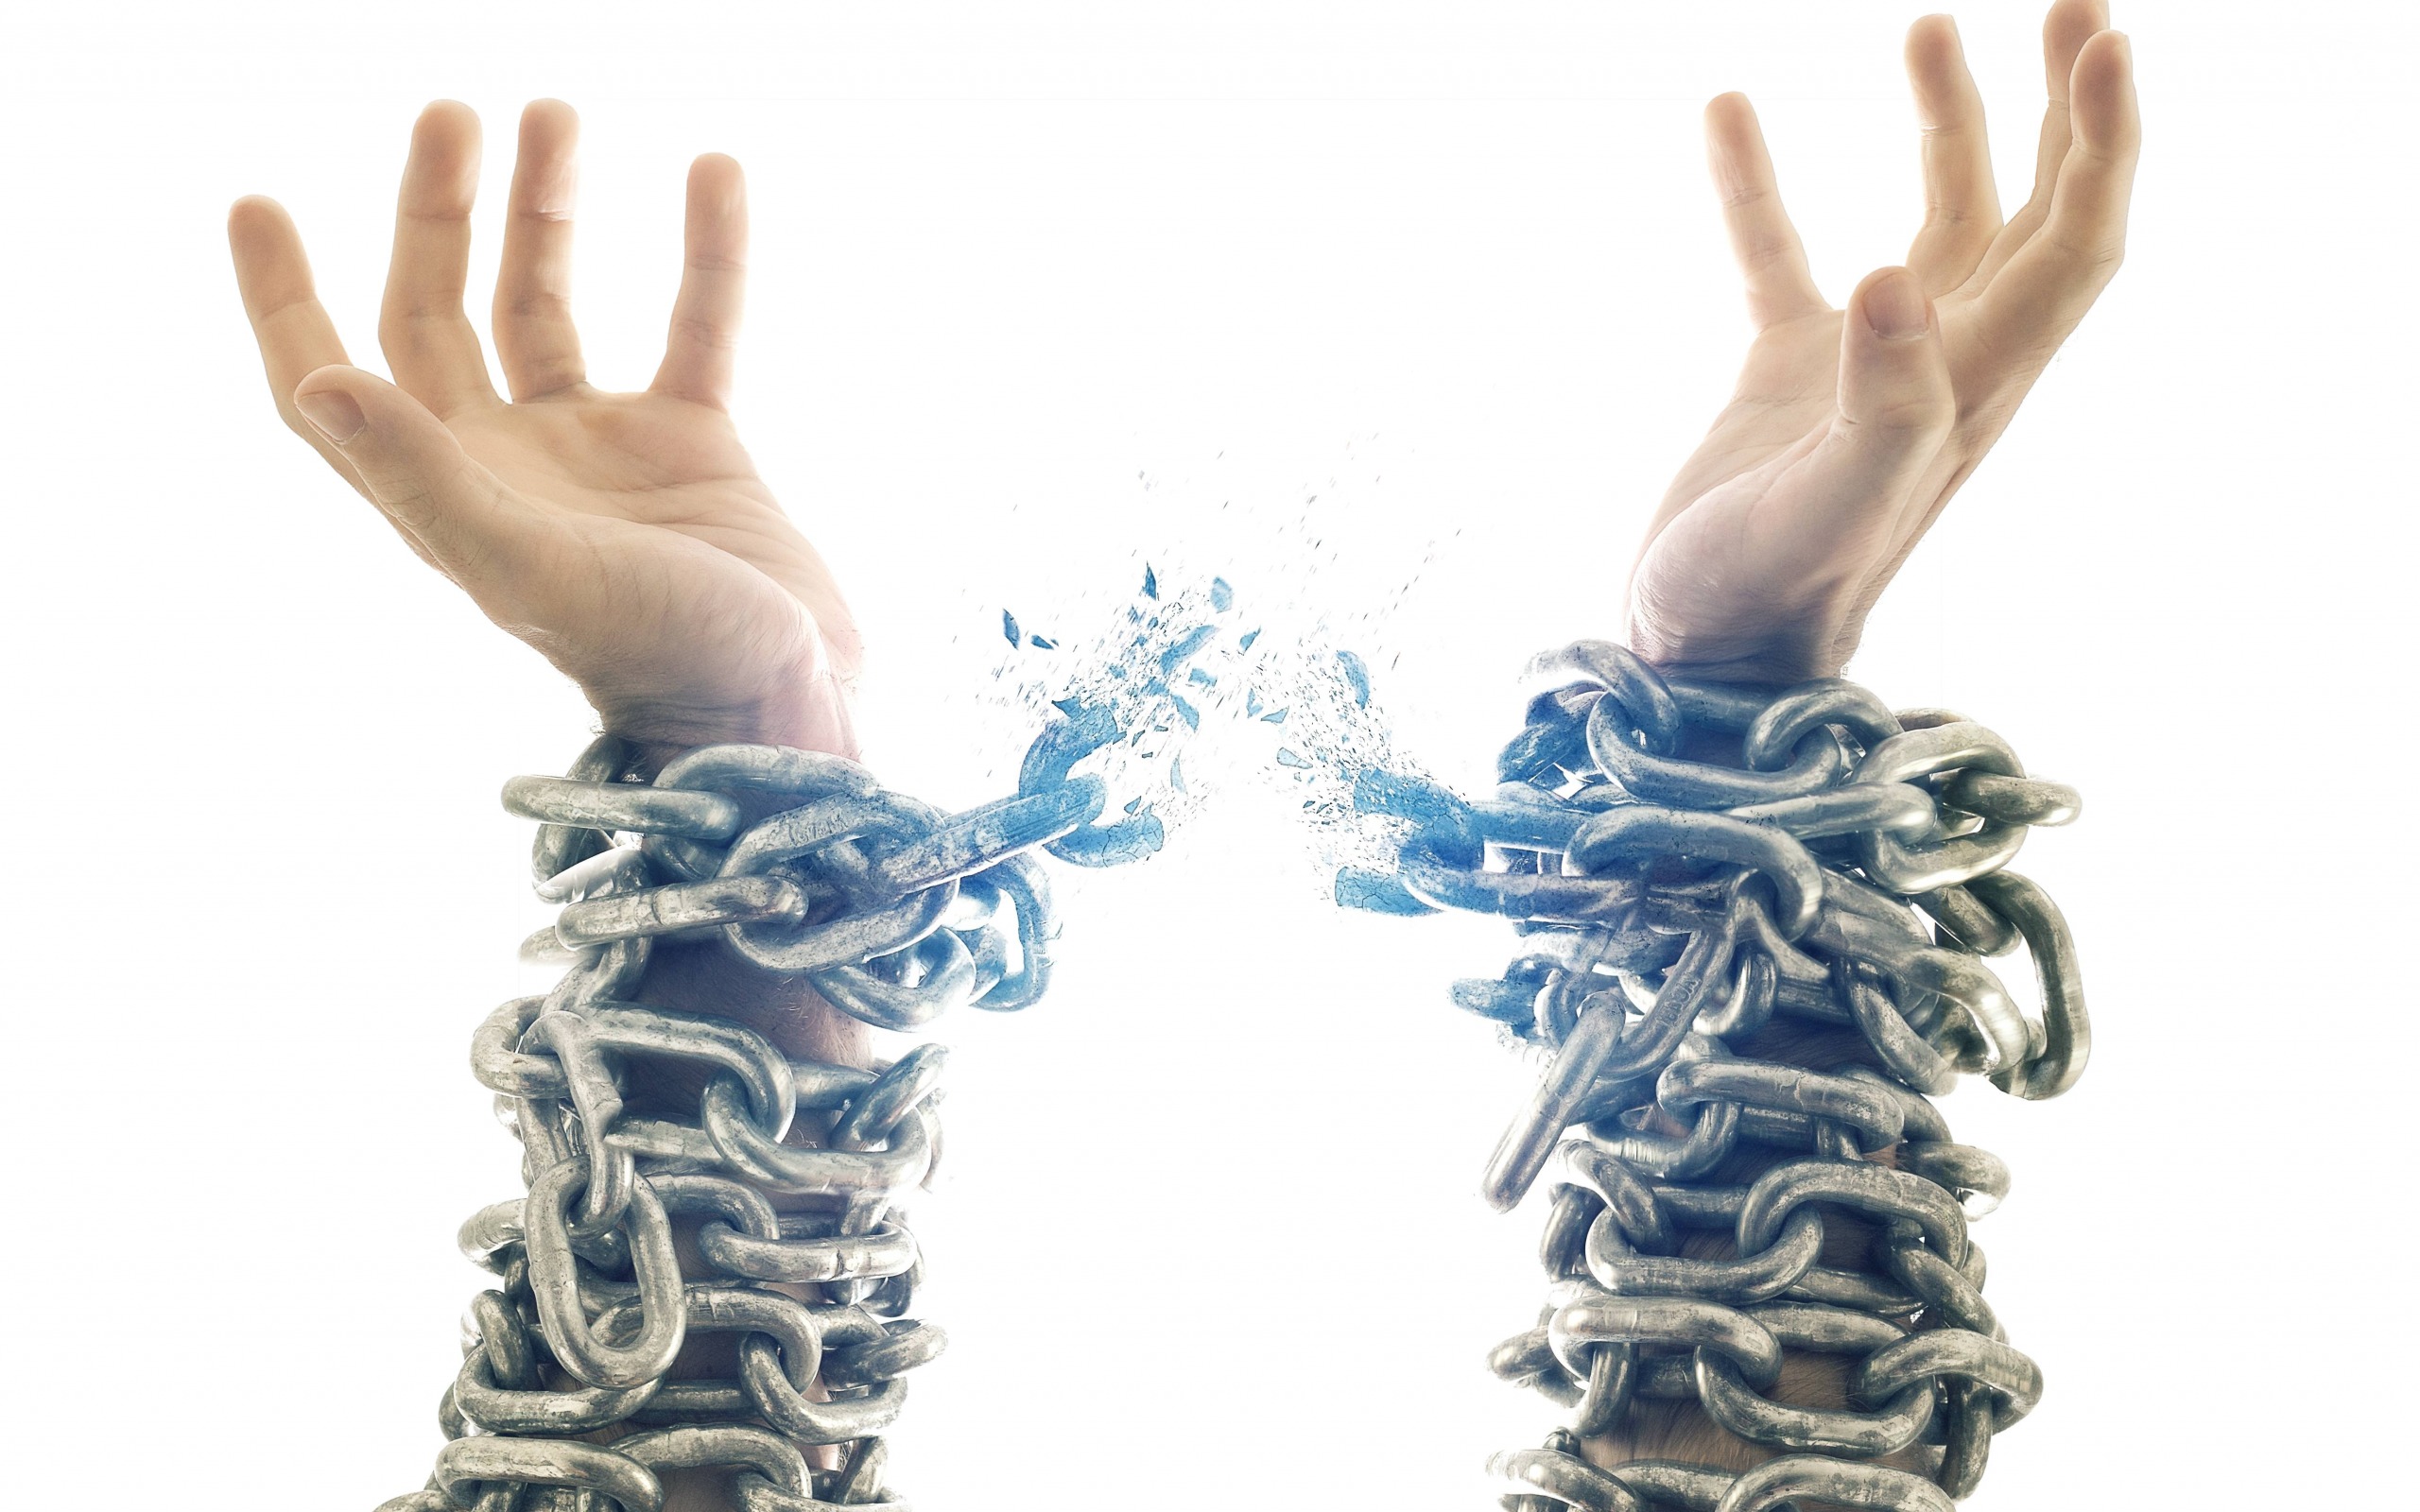 Download wallpaper broken chains on hands, release, chains, freedom concepts, free hands for desktop with resolution 2560x1600. High Quality HD picture wallpaper